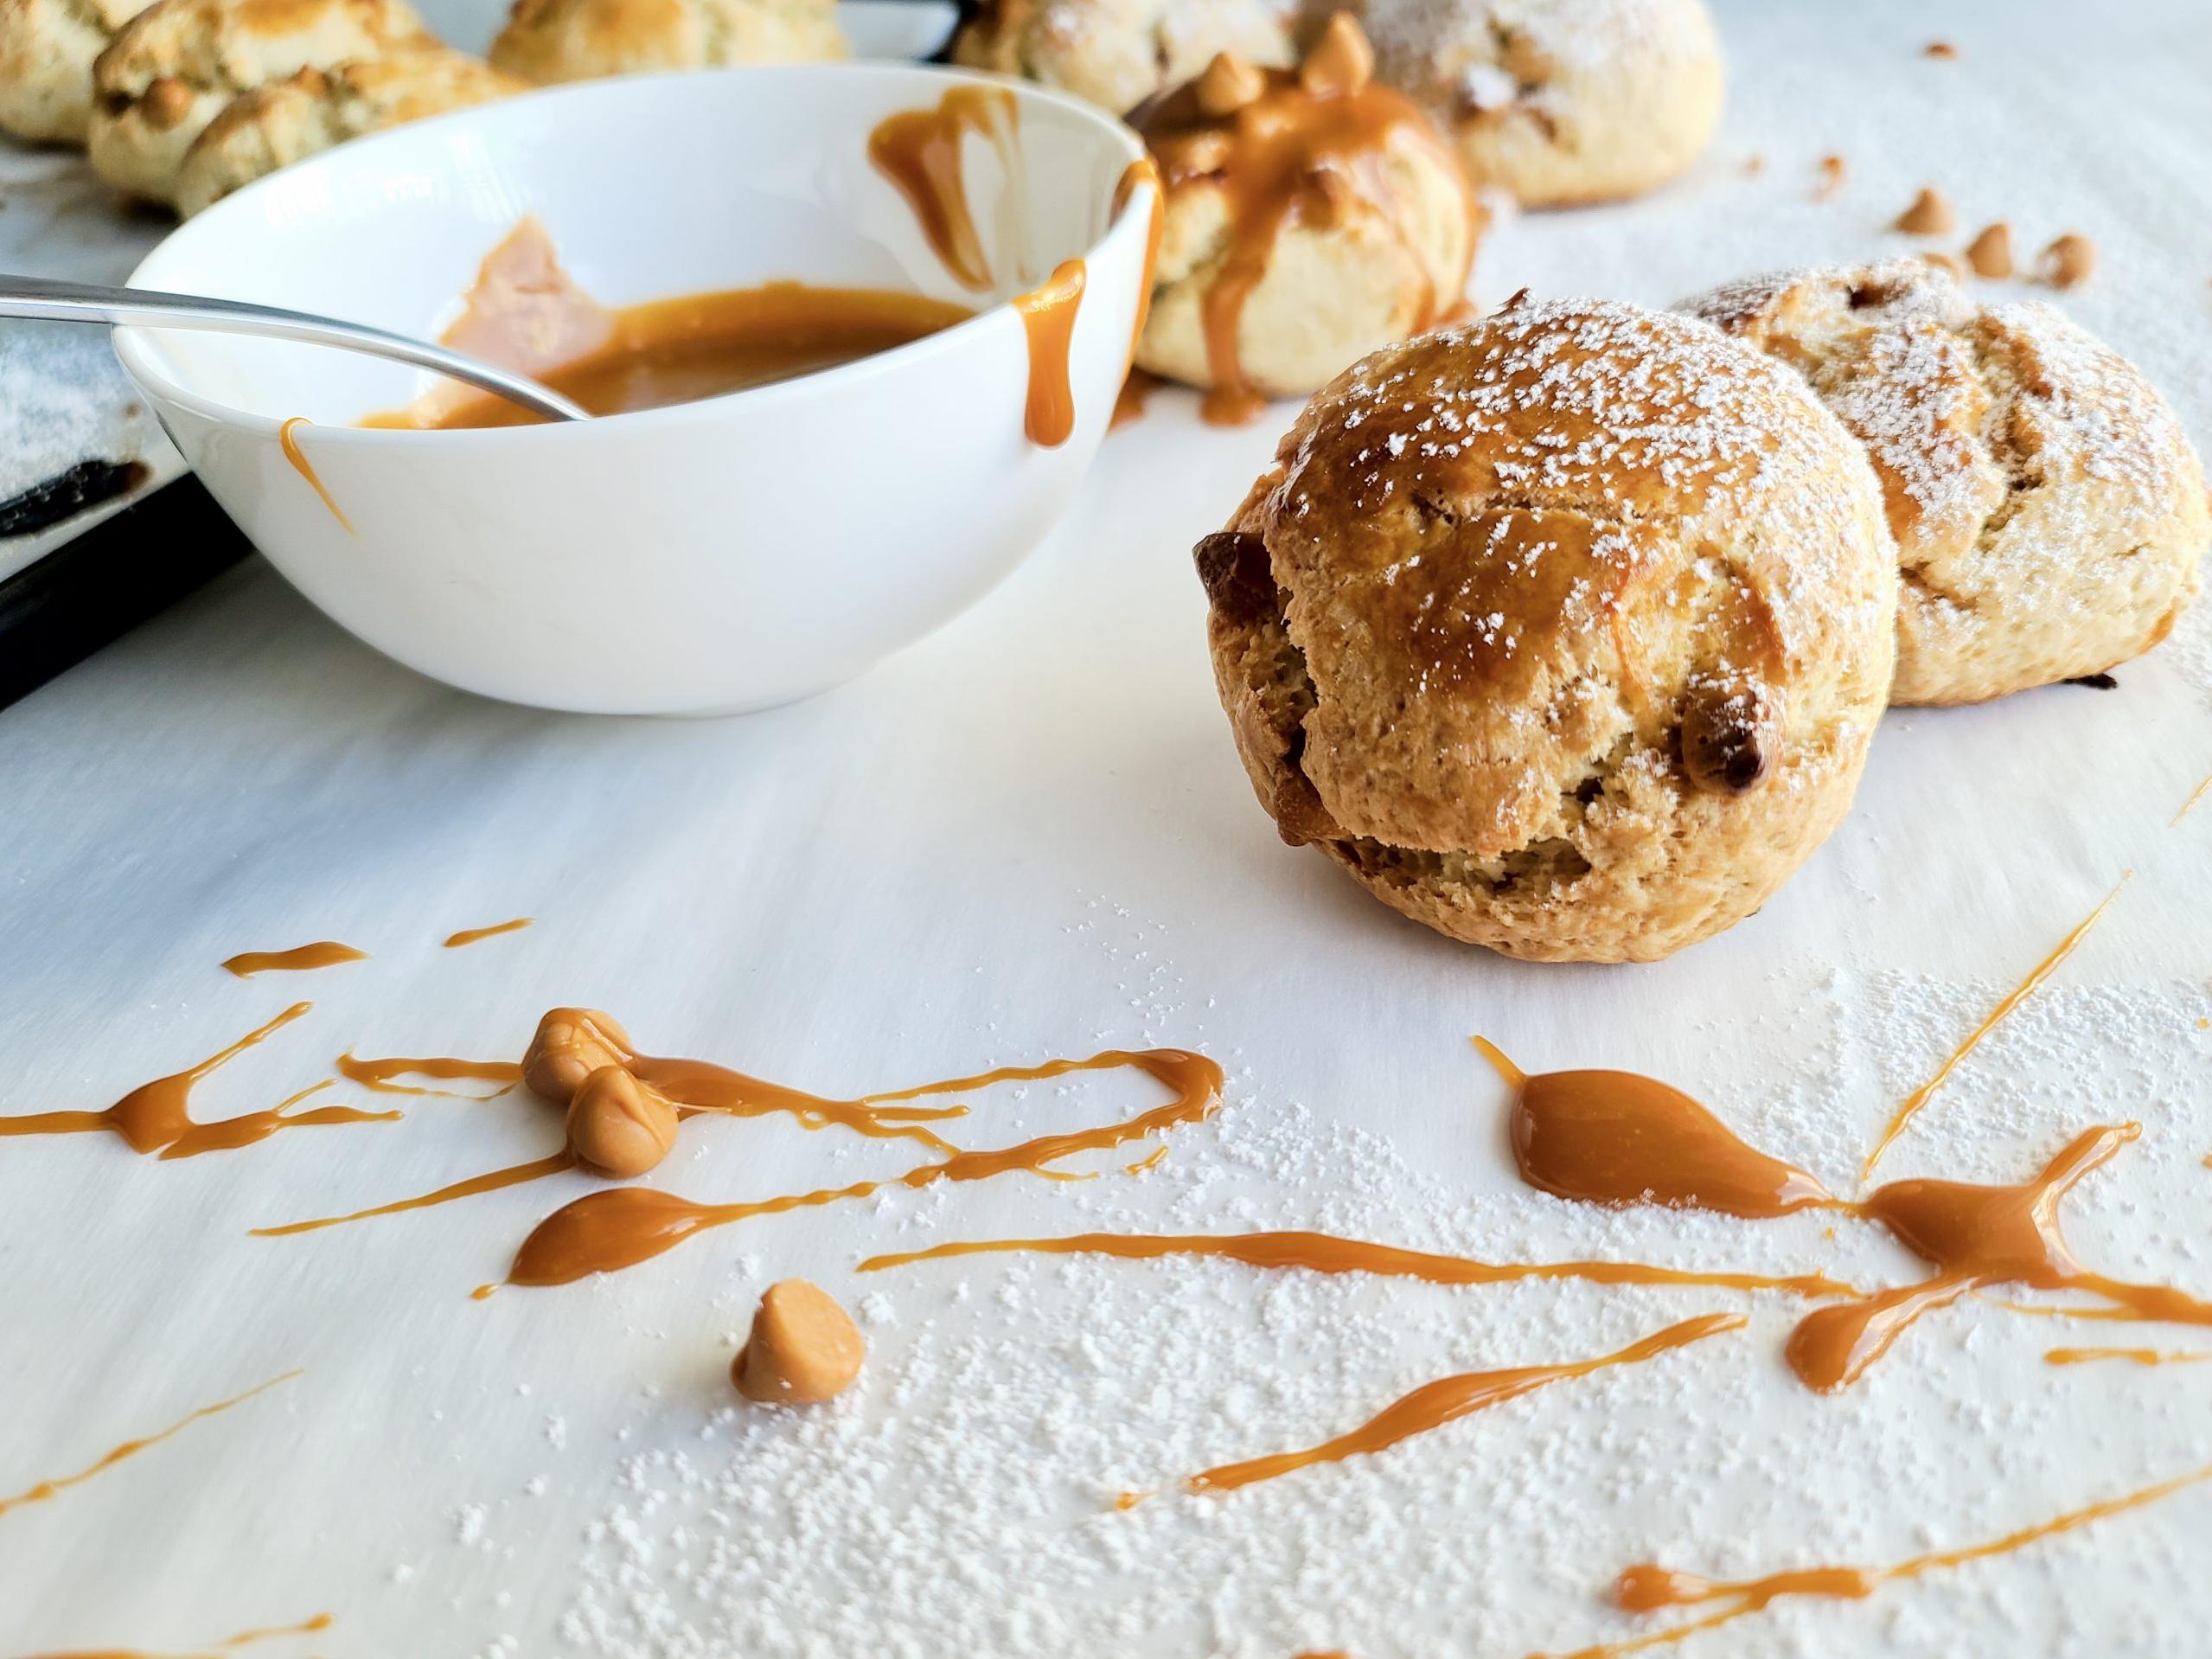  Make these scones for breakfast or afternoon tea, they’re perfect for any time of day.